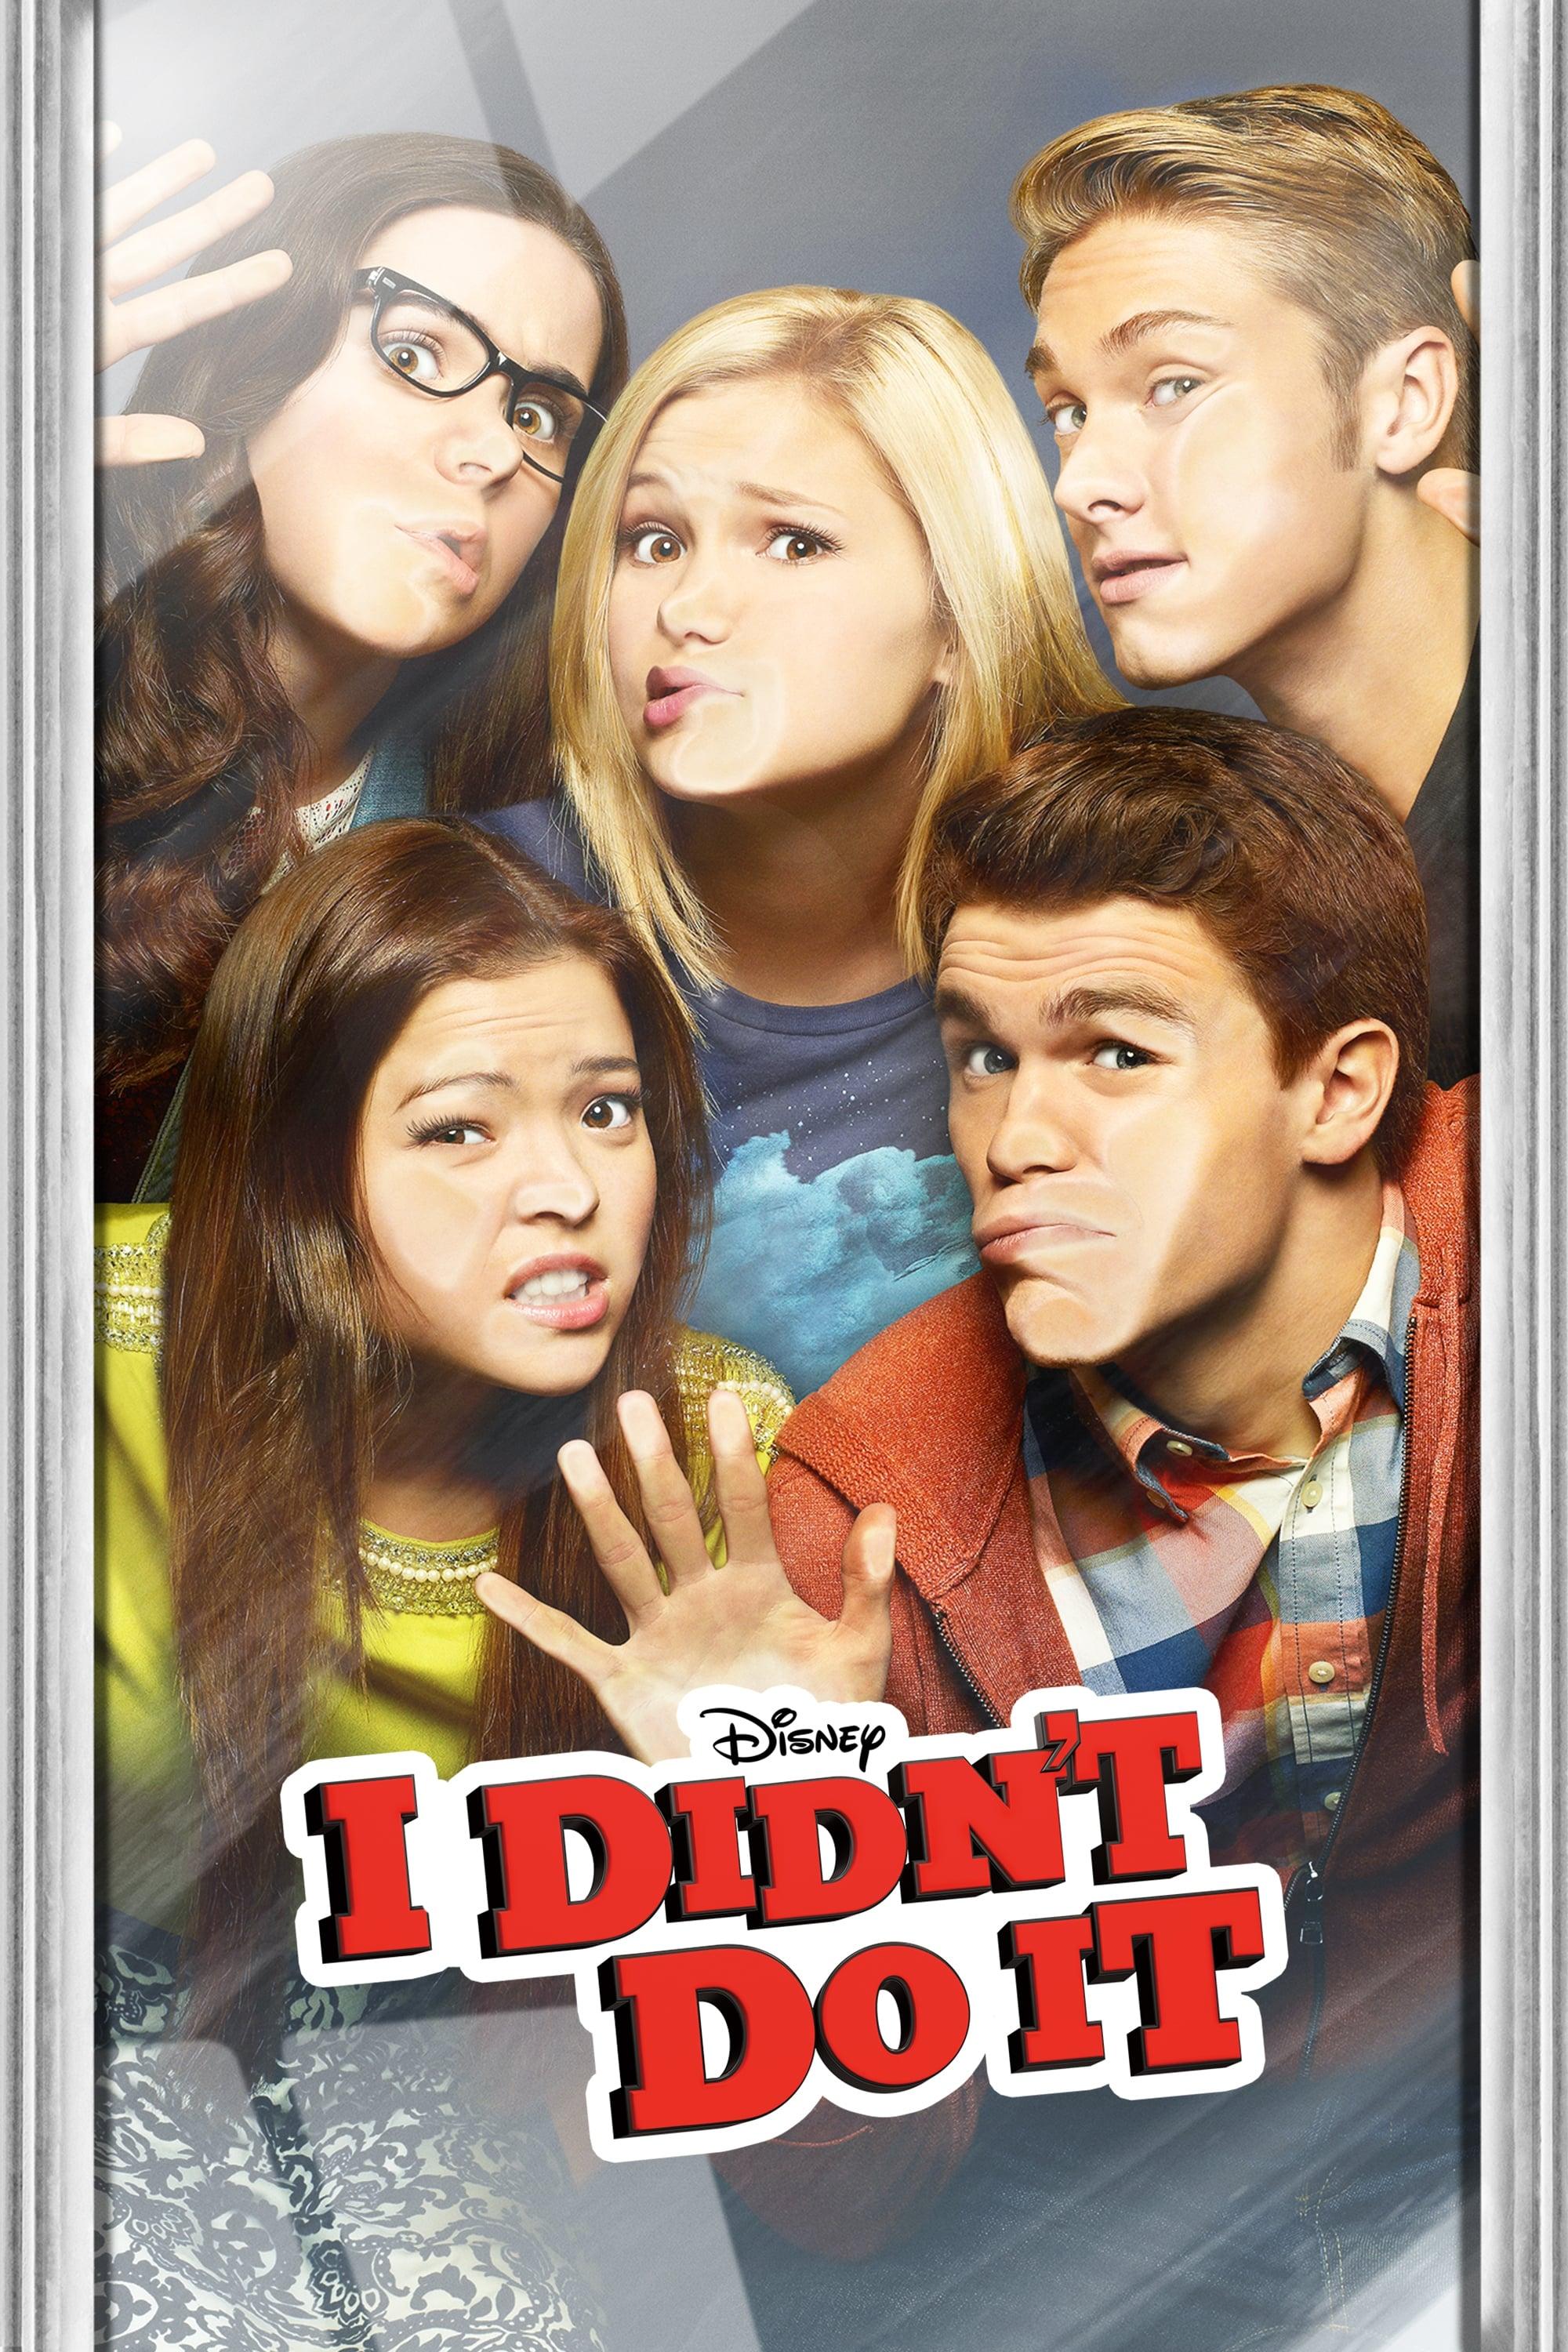 I Didn't Do It poster